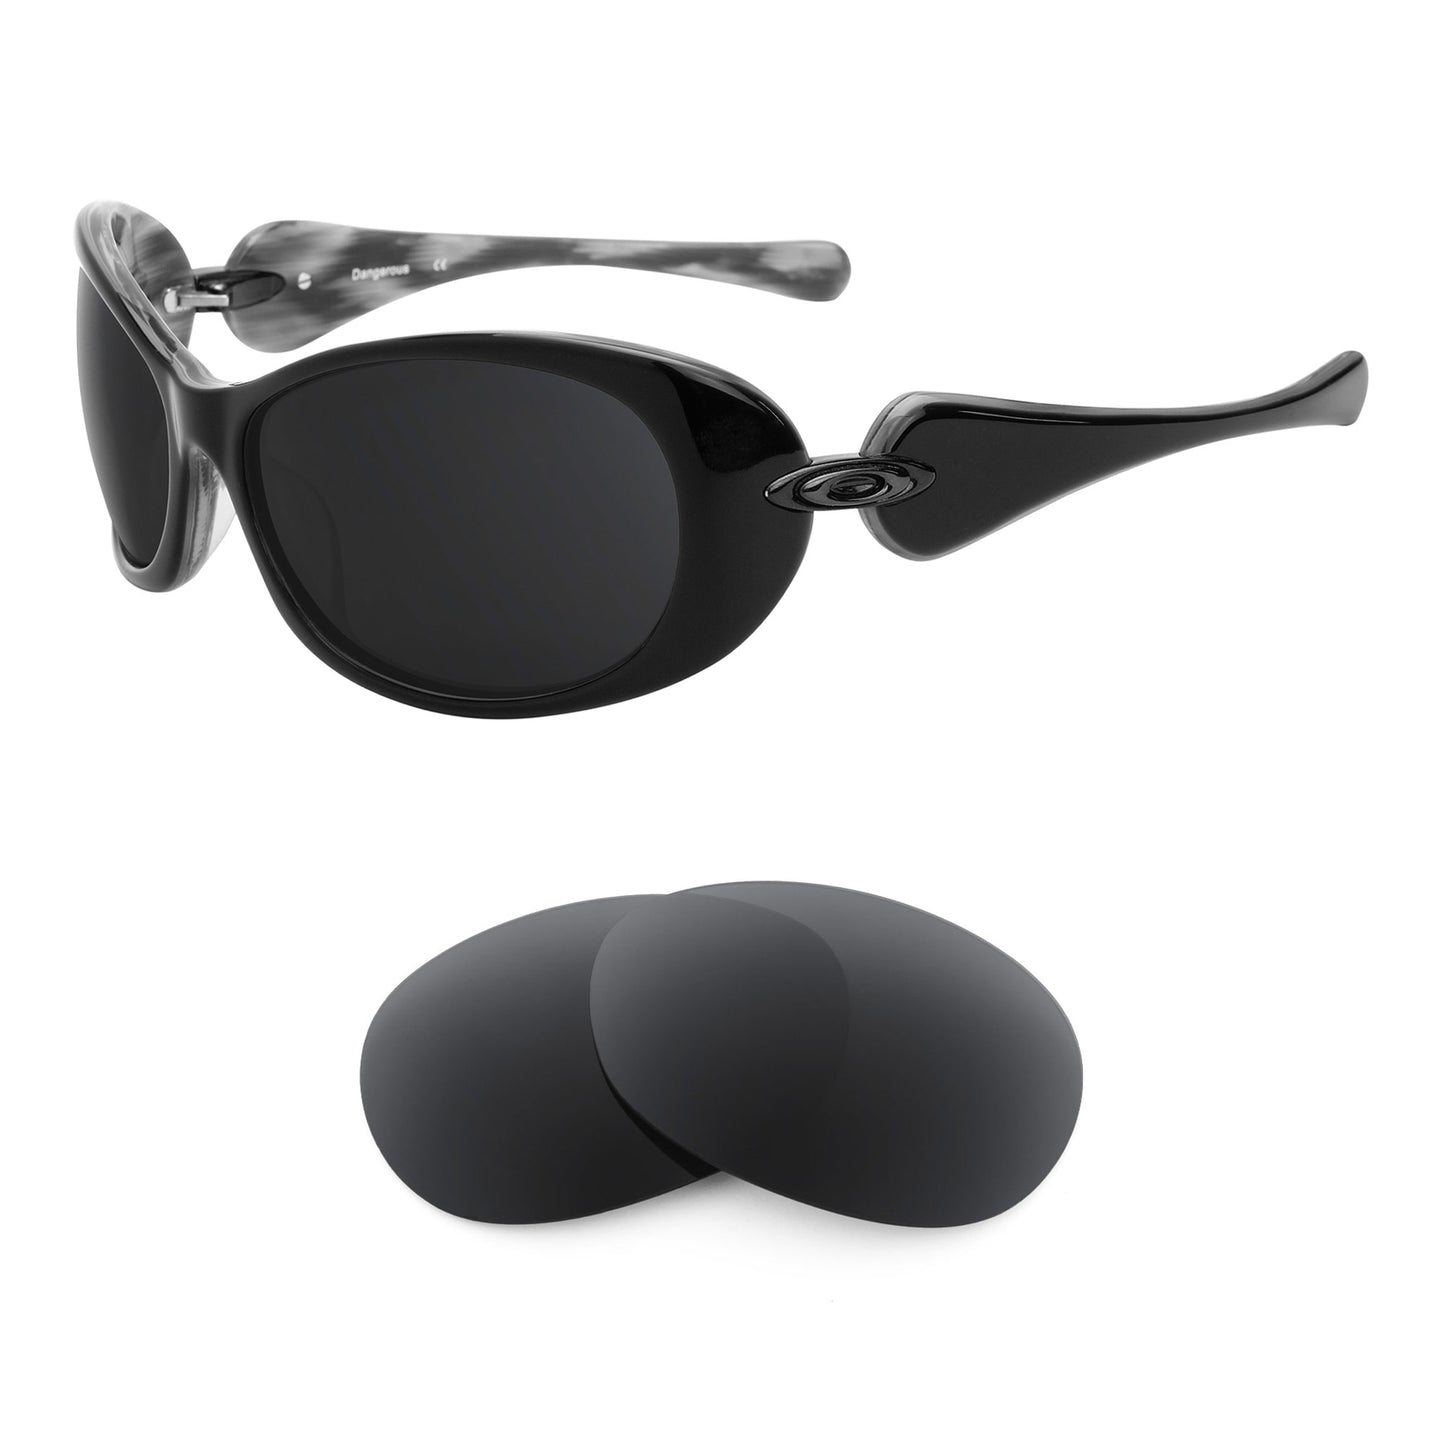 Oakley Dangerous sunglasses with replacement lenses